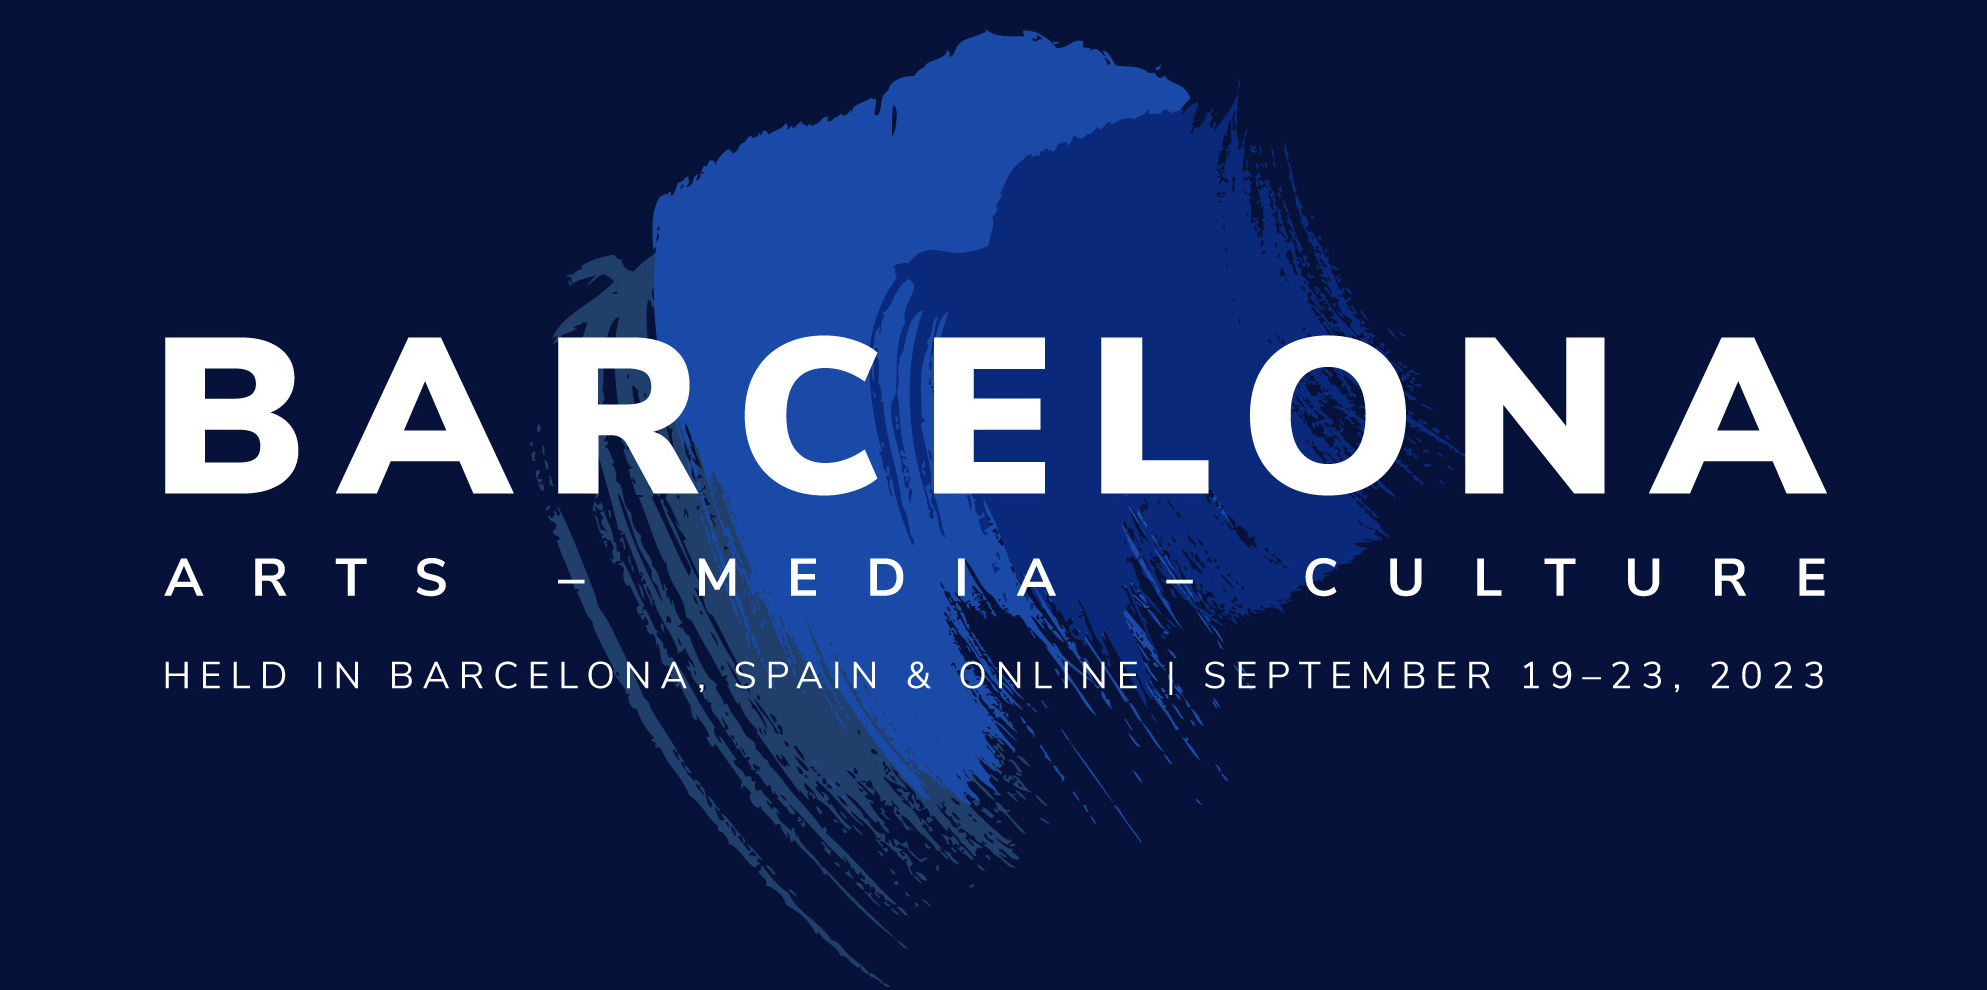 The-4th-Barcelona-Conference-on-Arts-Media-and-Culture-LOGO